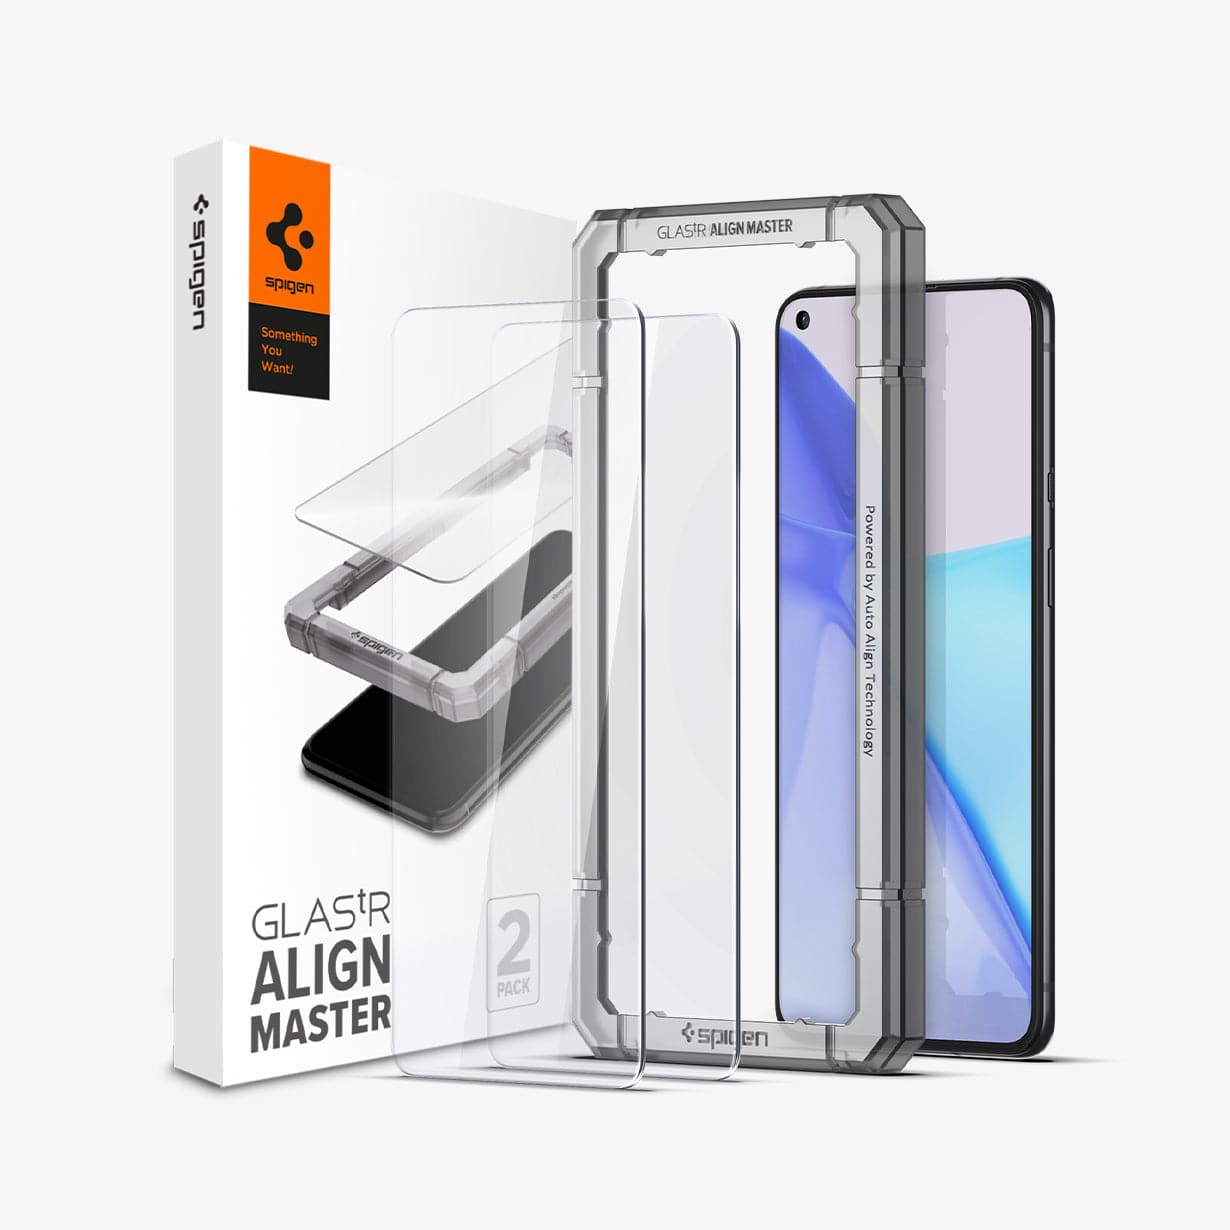 AGL02895 - OnePlus 9 Alignmaster Full Cover Screen Protector showing the device, alignmaster tray, two screen protectors and packaging